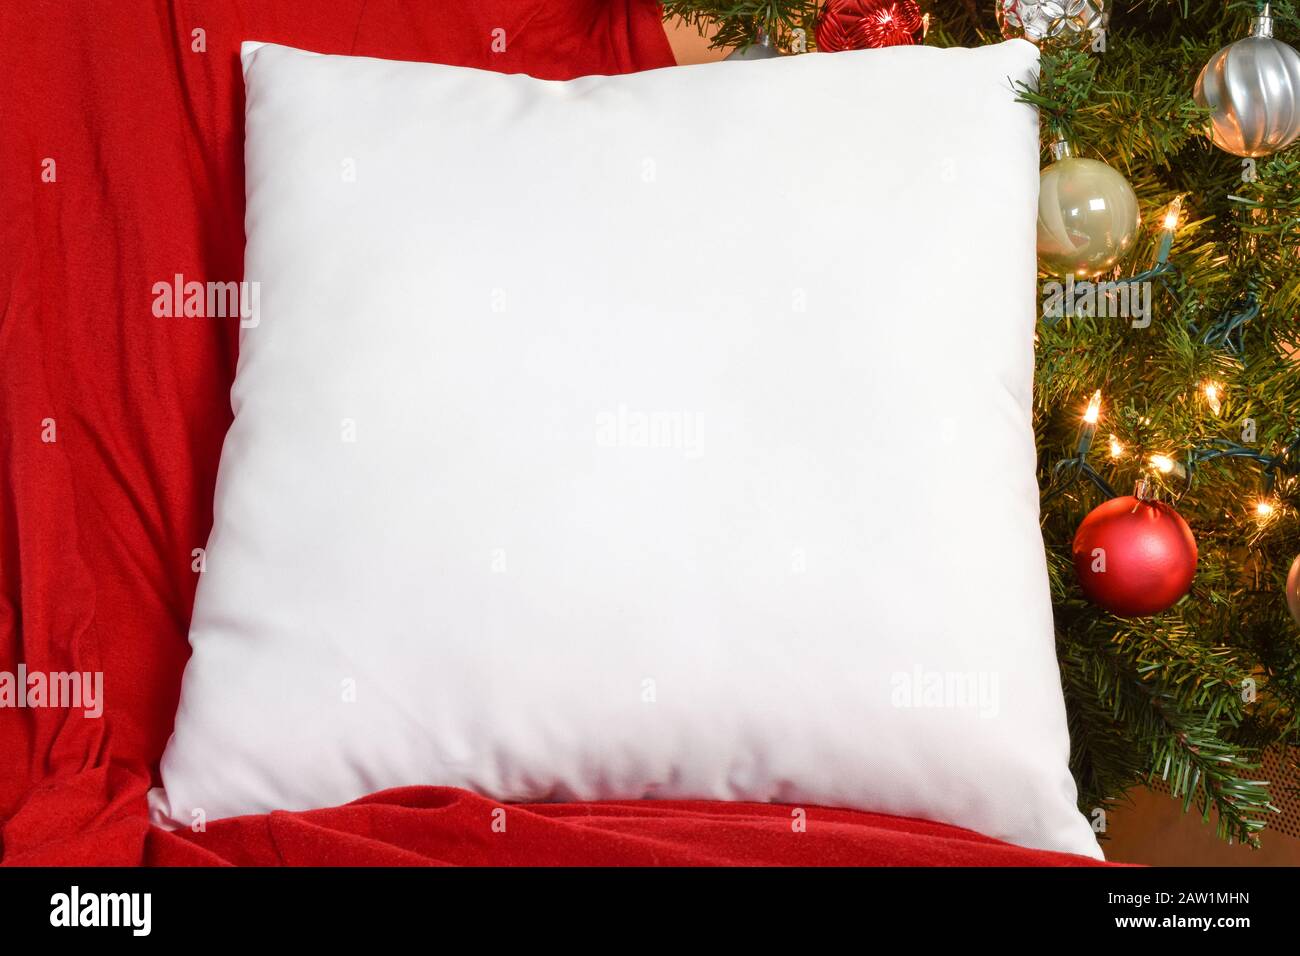 White Square PIllow Mockup Resting on Red Blanket with Lit Up Christmas Tree in Background Stock Photo